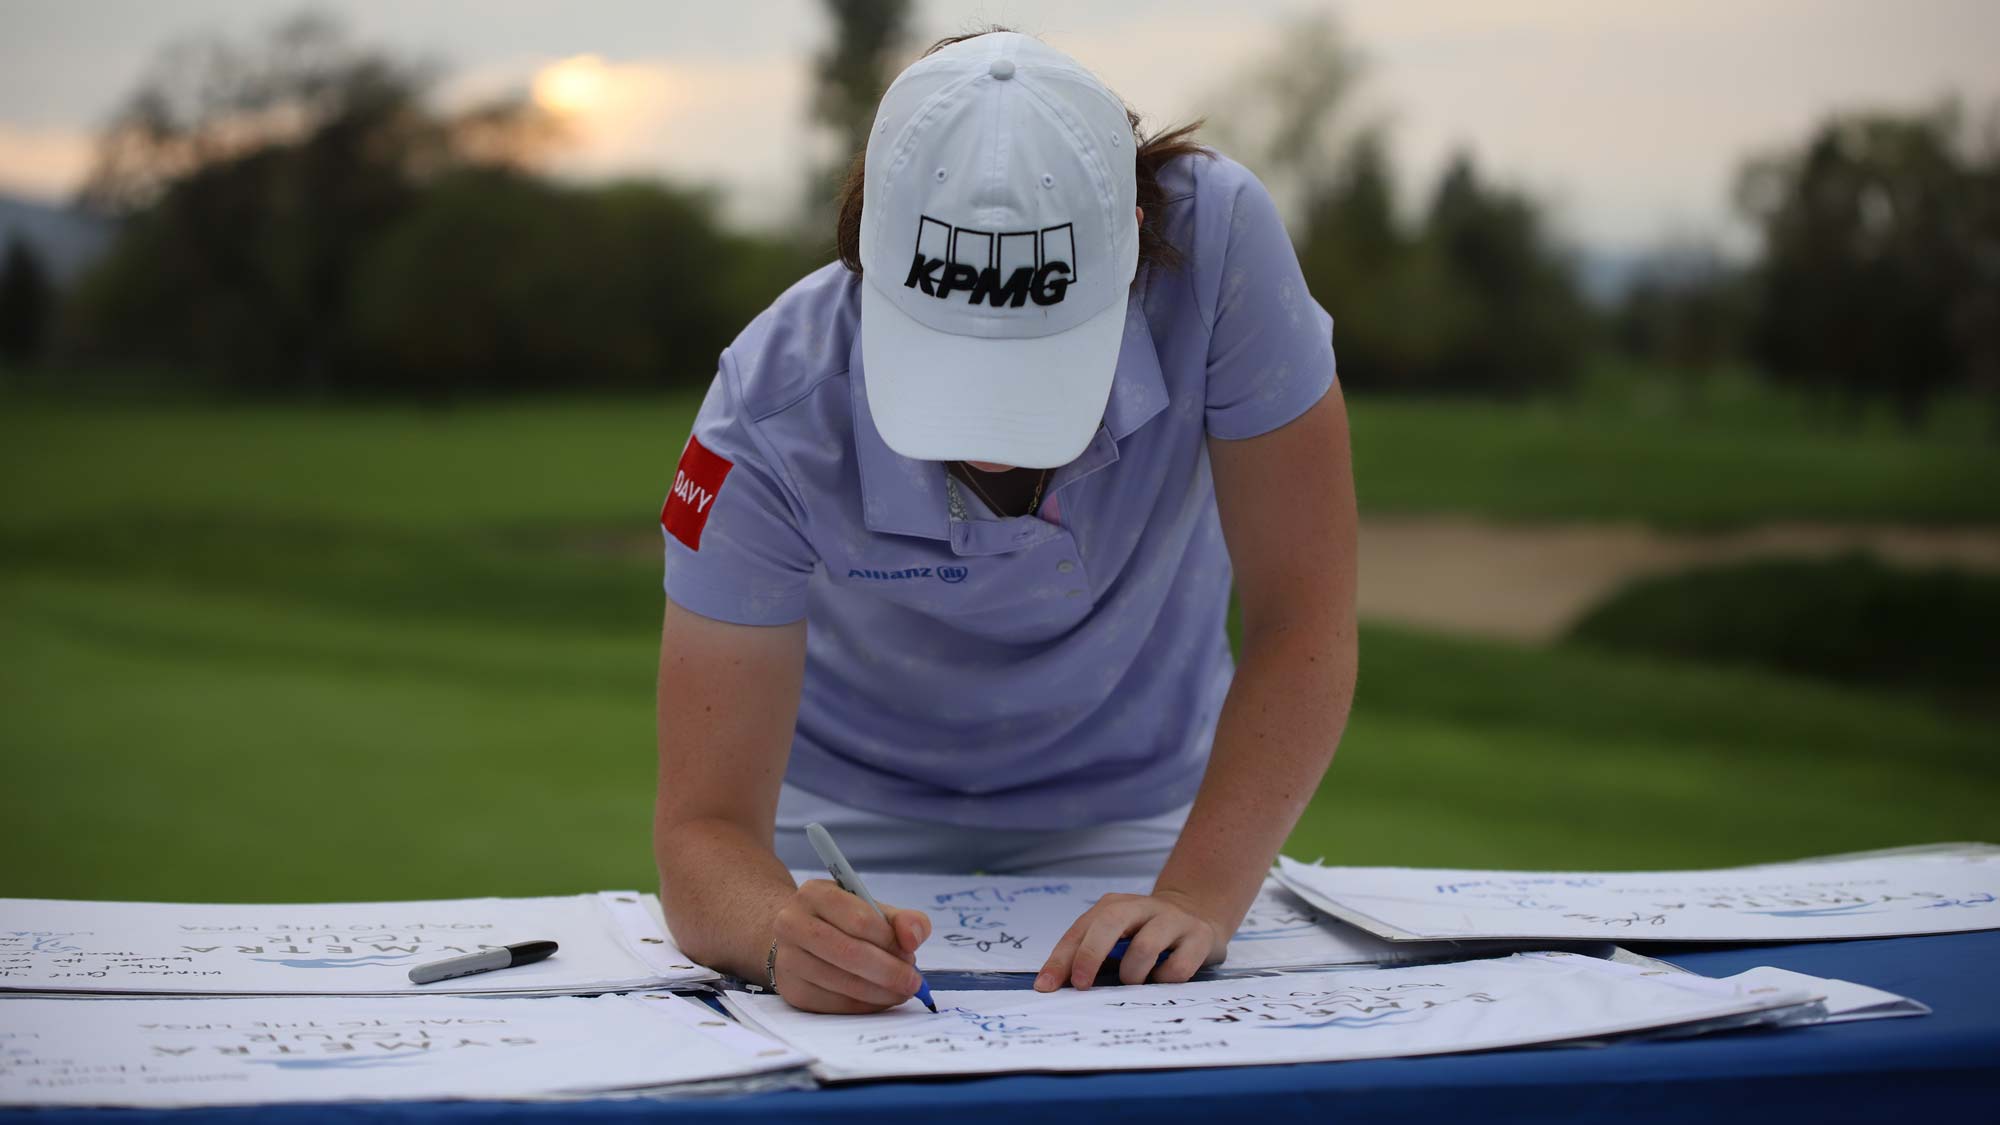 Leona Maguire signs flags